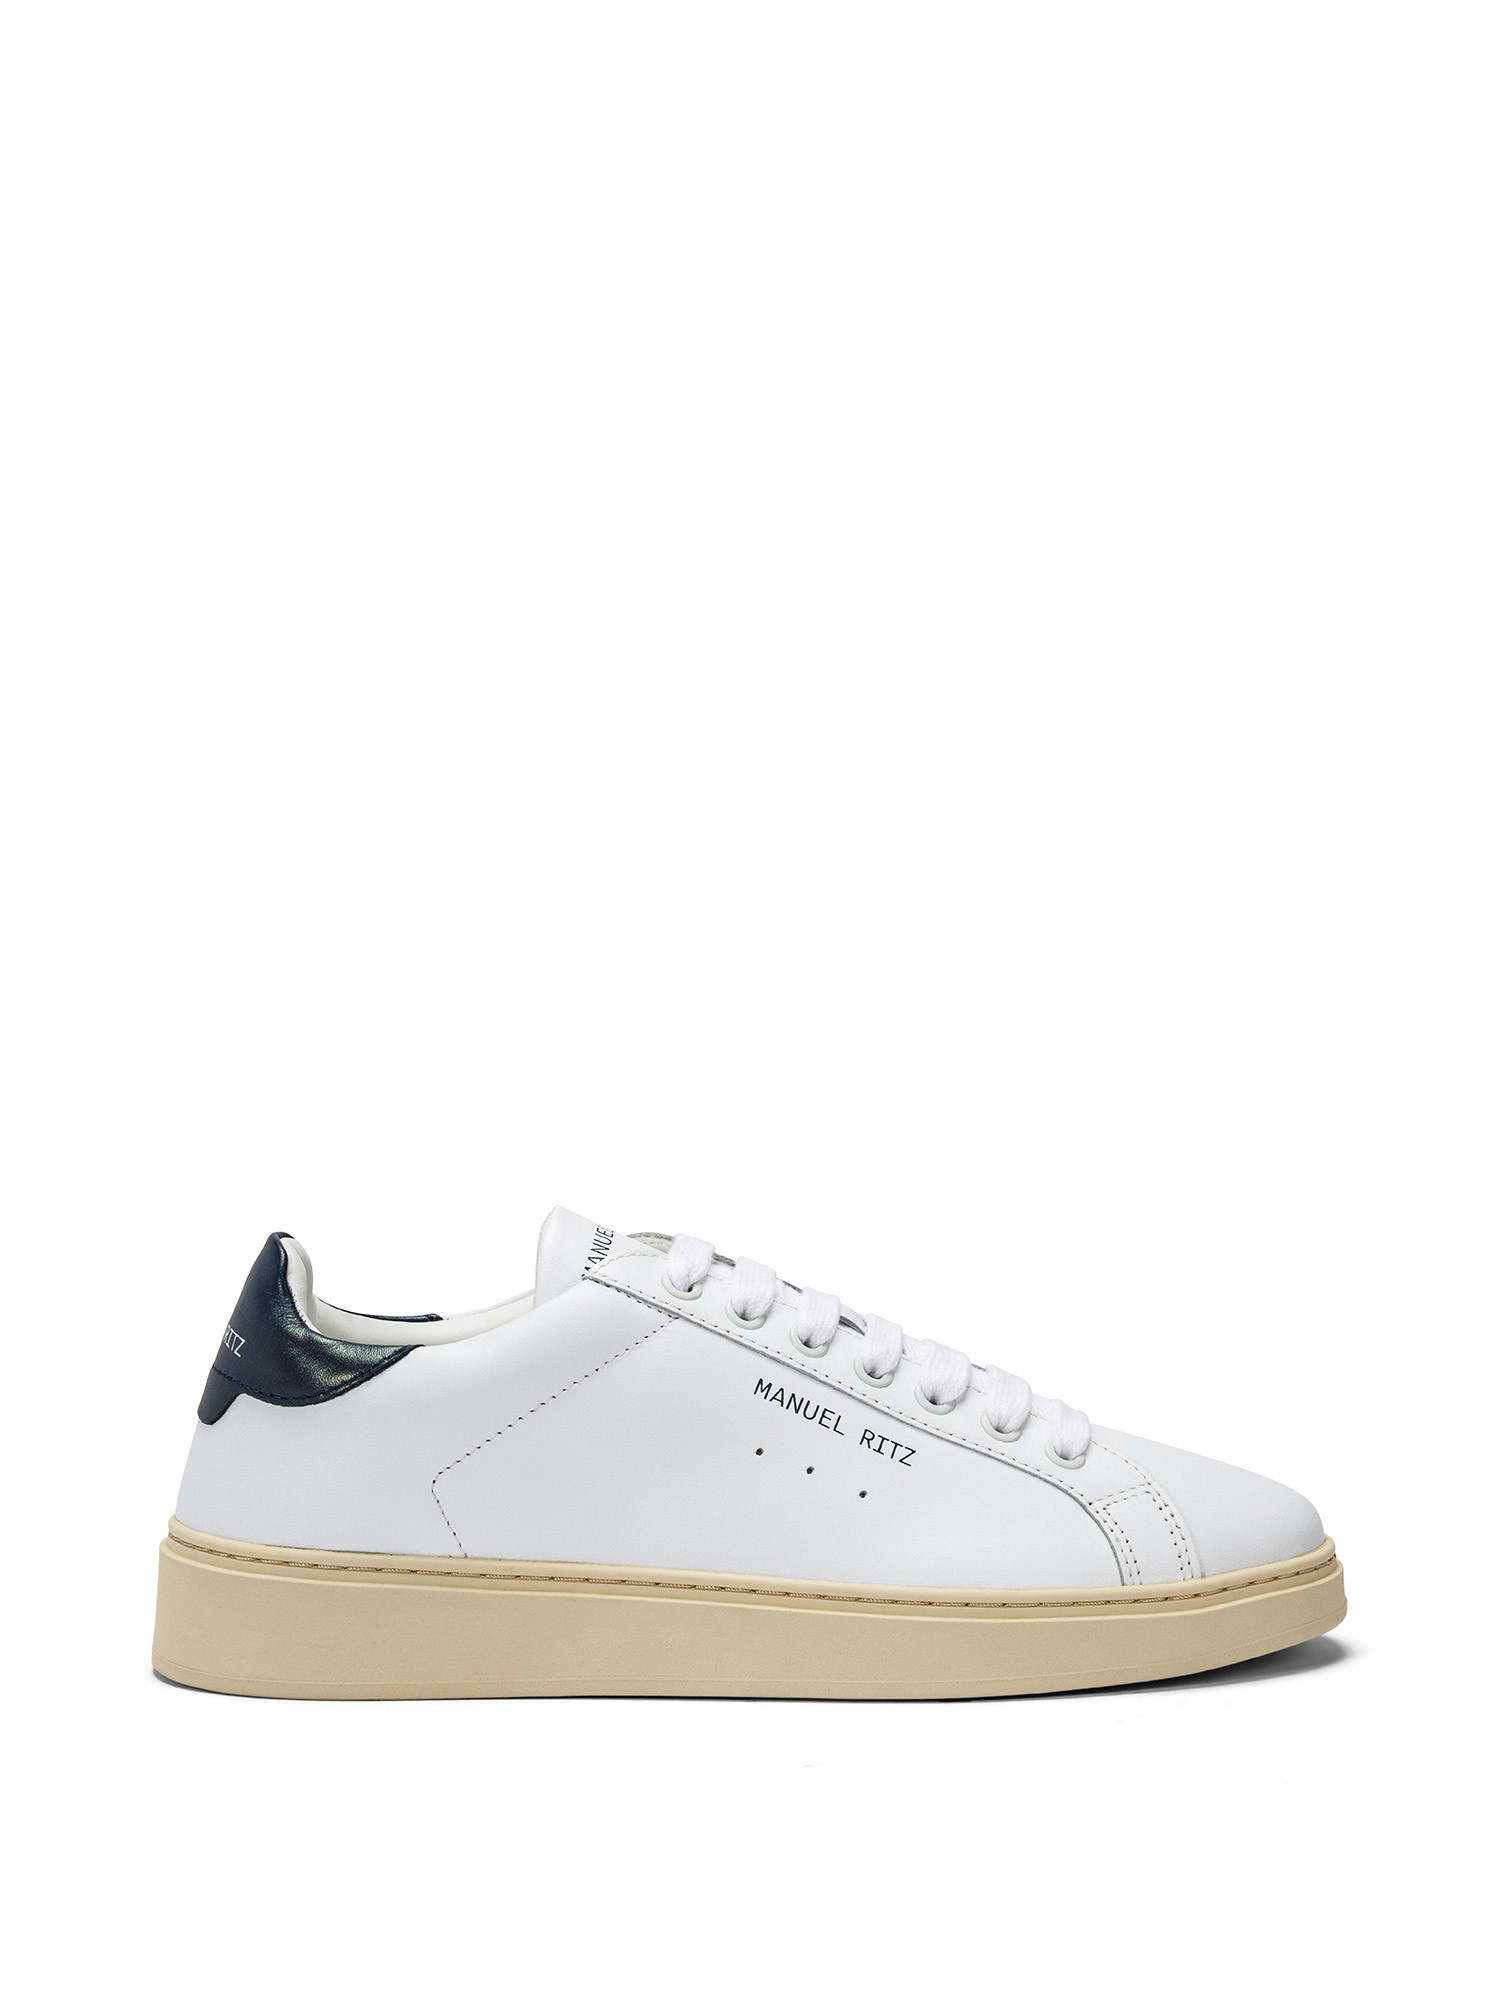 Manuel Ritz - Leather sneakers, White, large image number 0